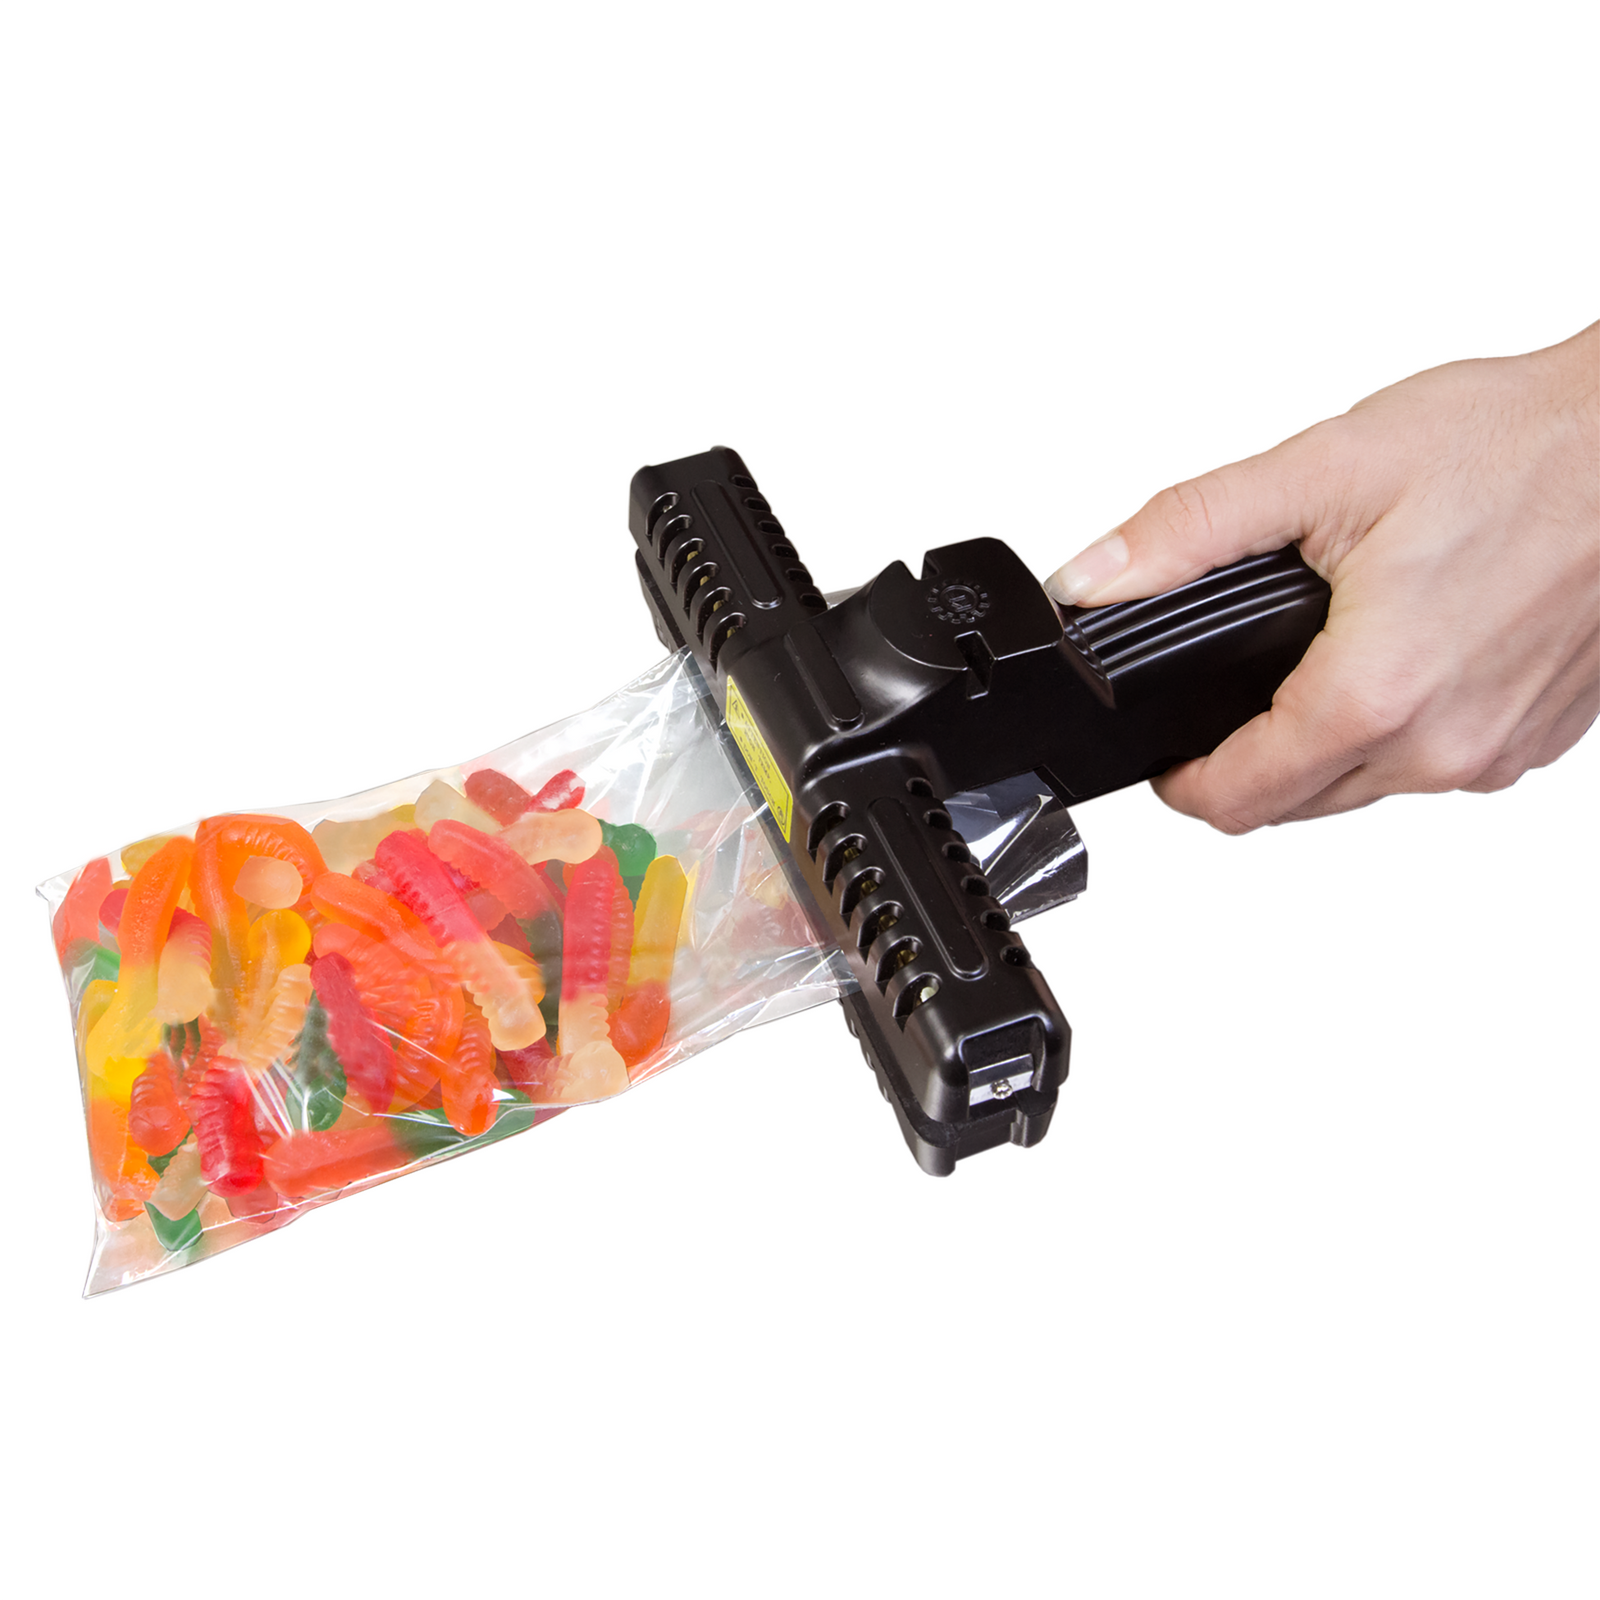 The hand of a person with a 6 inch constant heat hand held crimp wide sealer sealing a bag filled with candies